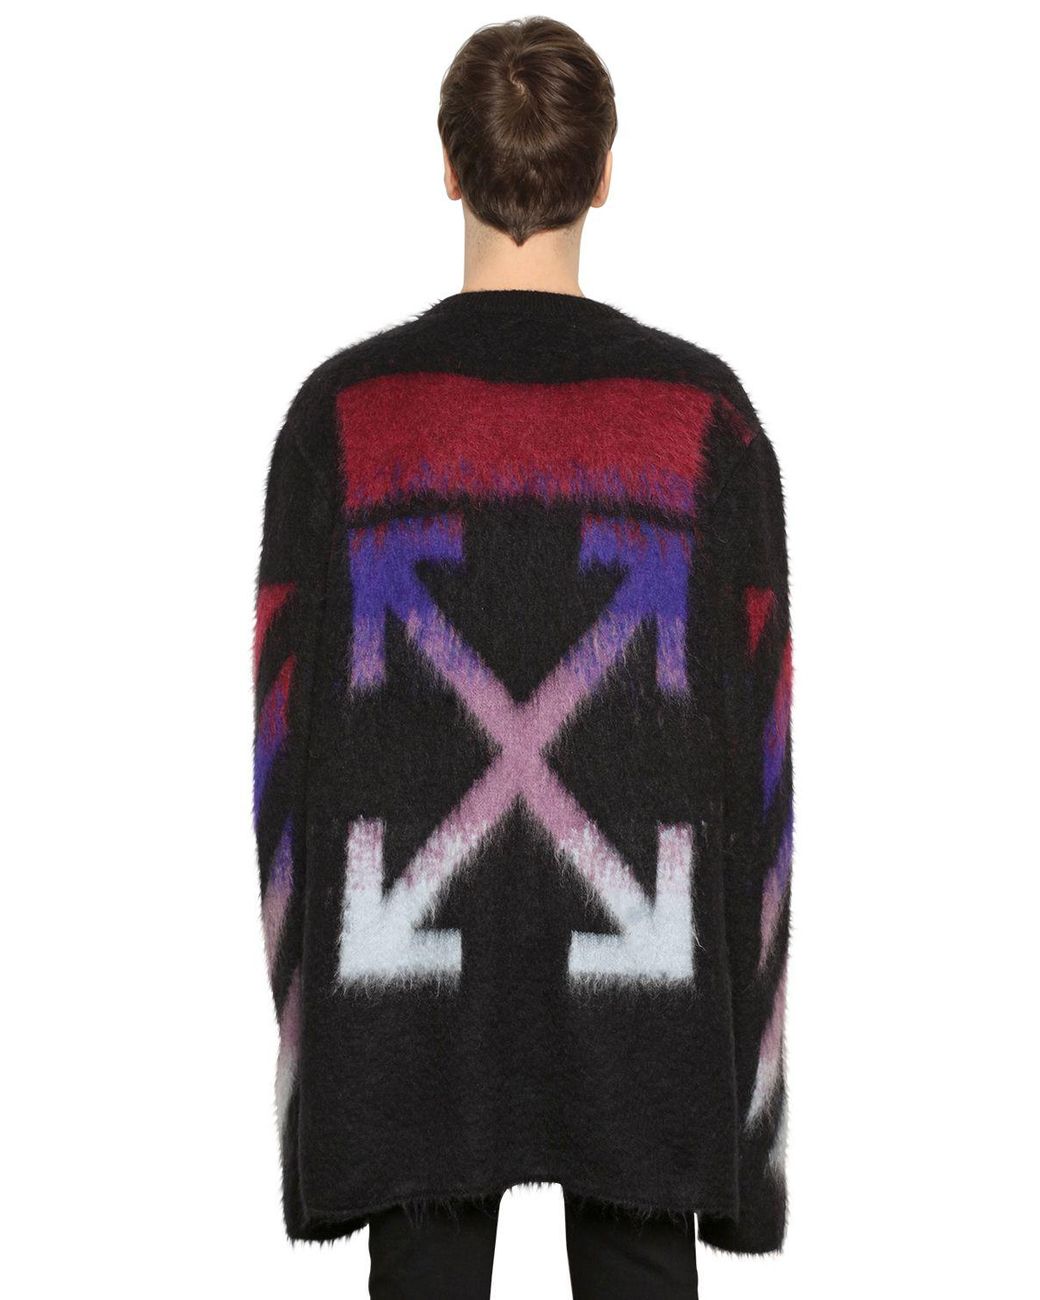 FOR SALE) An Autumn Winter 2019 Louis Vuitton by Virgil Abloh Mohair Flag  Knitted Sweater. Virgil Abloh's sophomore collection at the…